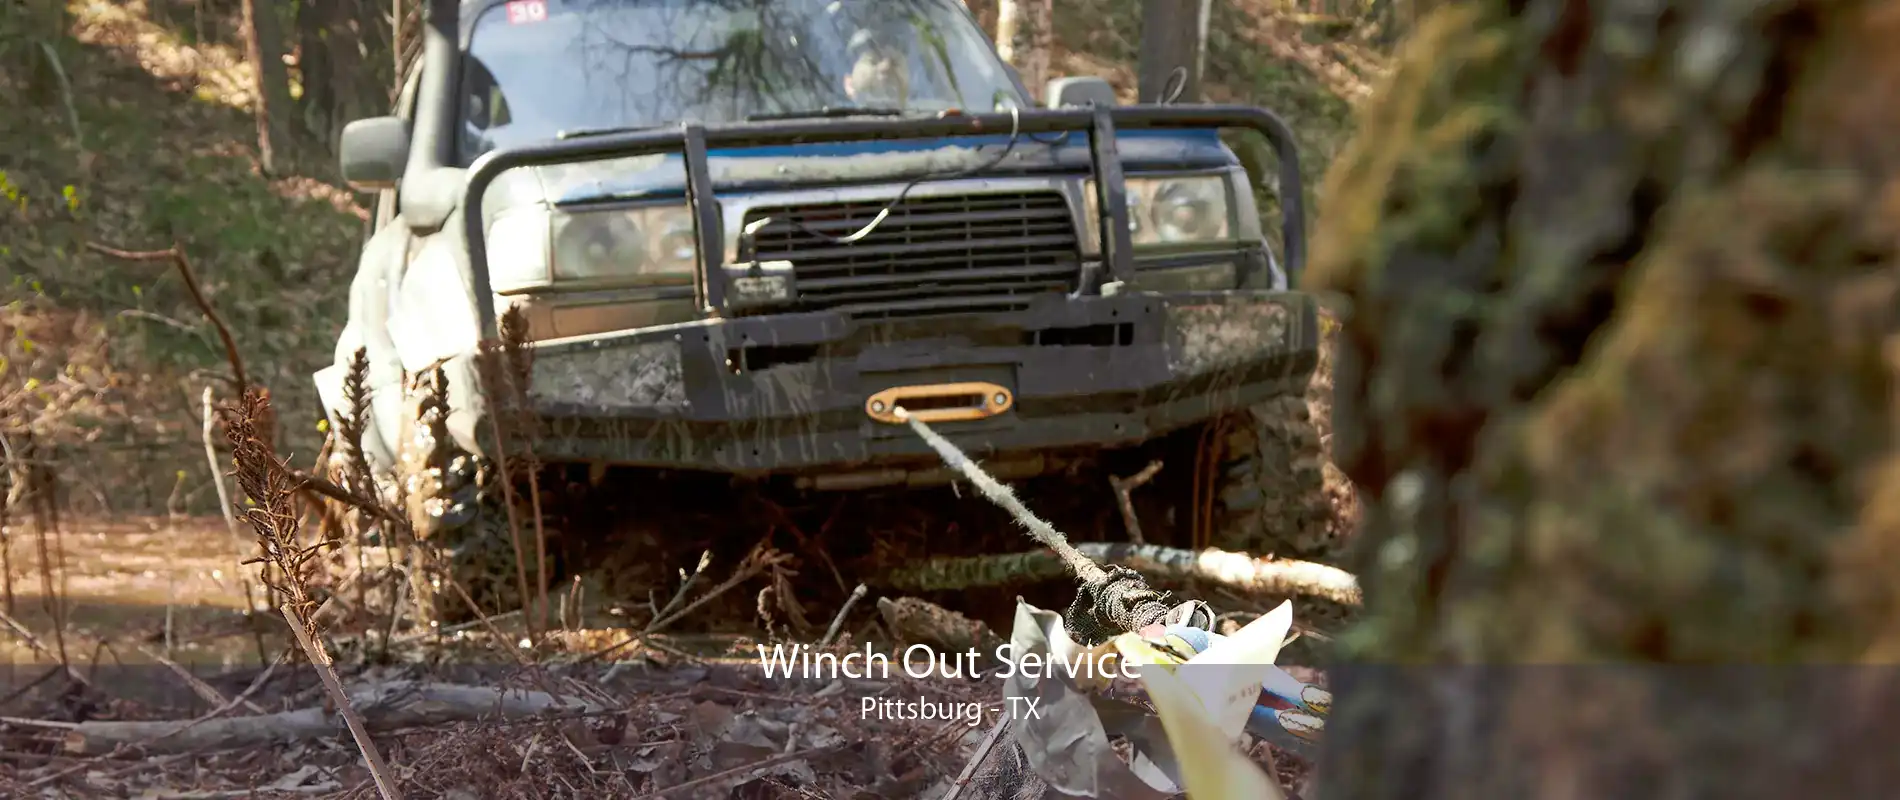 Winch Out Service Pittsburg - TX